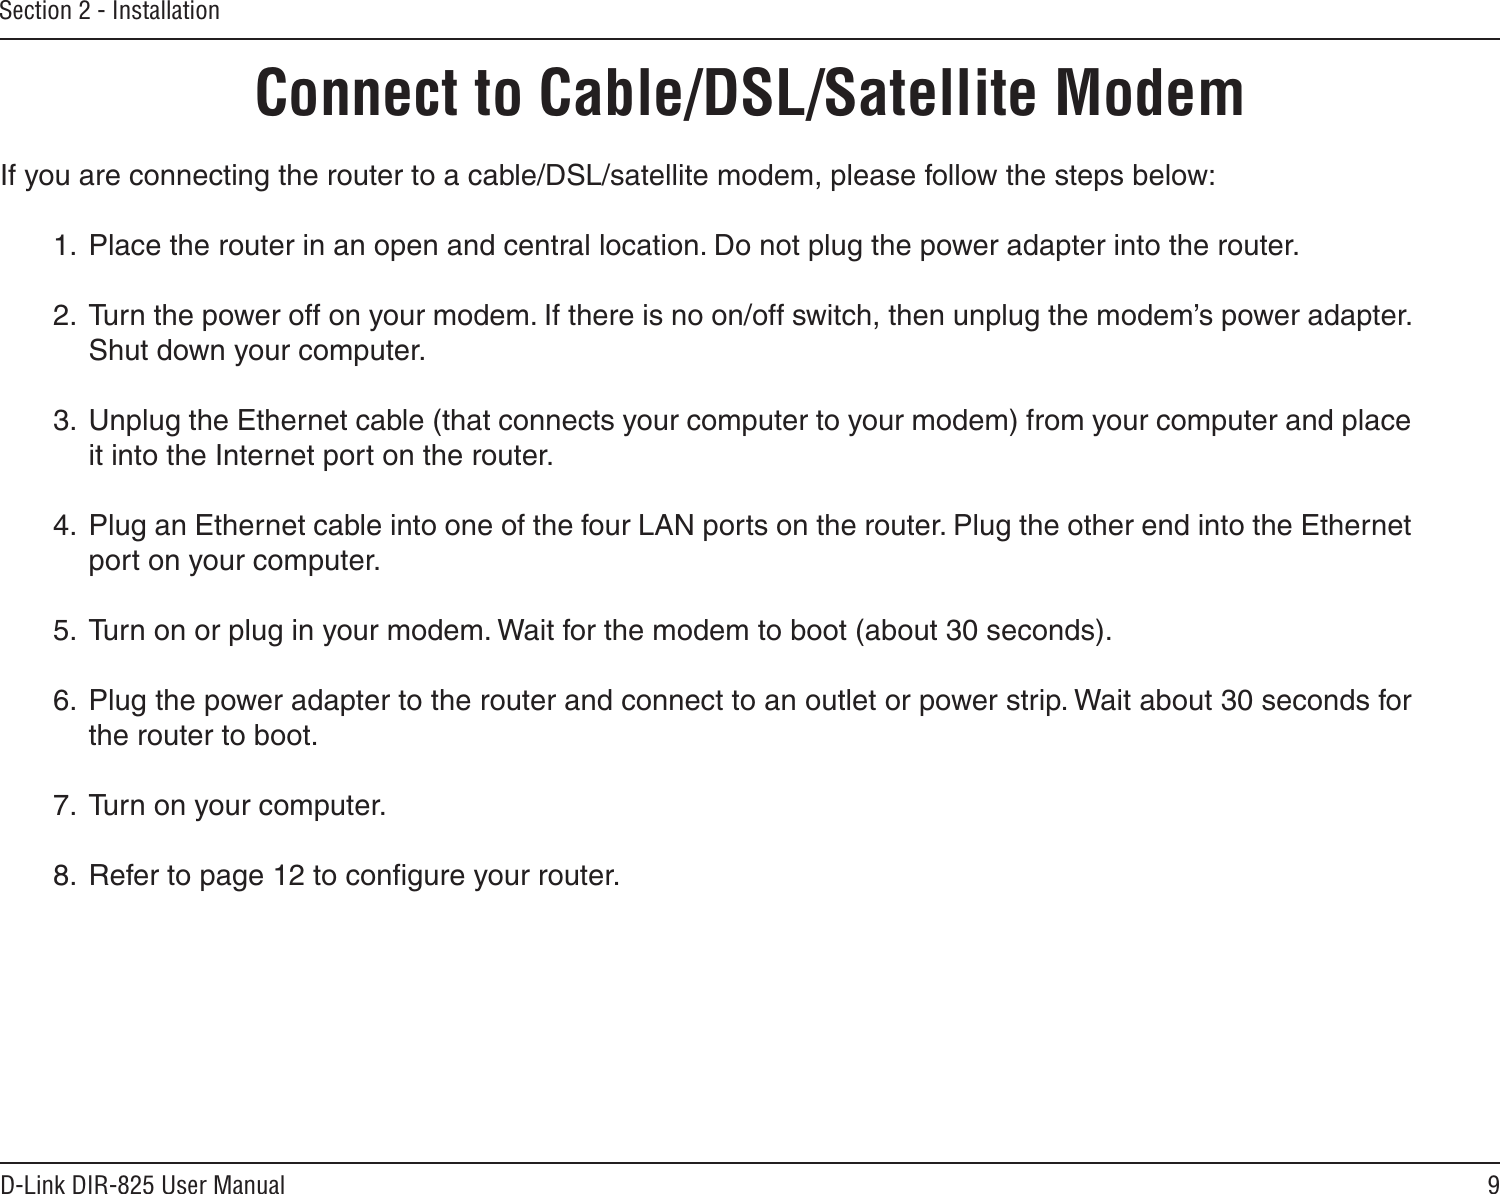 9D-Link DIR-825 User ManualSection 2 - InstallationIf you are connecting the router to a cable/DSL/satellite modem, please follow the steps below:1.  Place the router in an open and central location. Do not plug the power adapter into the router.2.  Turn the power off on your modem. If there is no on/off switch, then unplug the modem’s power adapter. Shut down your computer.3.  Unplug the Ethernet cable (that connects your computer to your modem) from your computer and place it into the Internet port on the router.4.  Plug an Ethernet cable into one of the four LAN ports on the router. Plug the other end into the Ethernet port on your computer.5.  Turn on or plug in your modem. Wait for the modem to boot (about 30 seconds).6.  Plug the power adapter to the router and connect to an outlet or power strip. Wait about 30 seconds for the router to boot.7.  Turn on your computer.8.  Refer to page 12 to conﬁgure your router.Connect to Cable/DSL/Satellite Modem